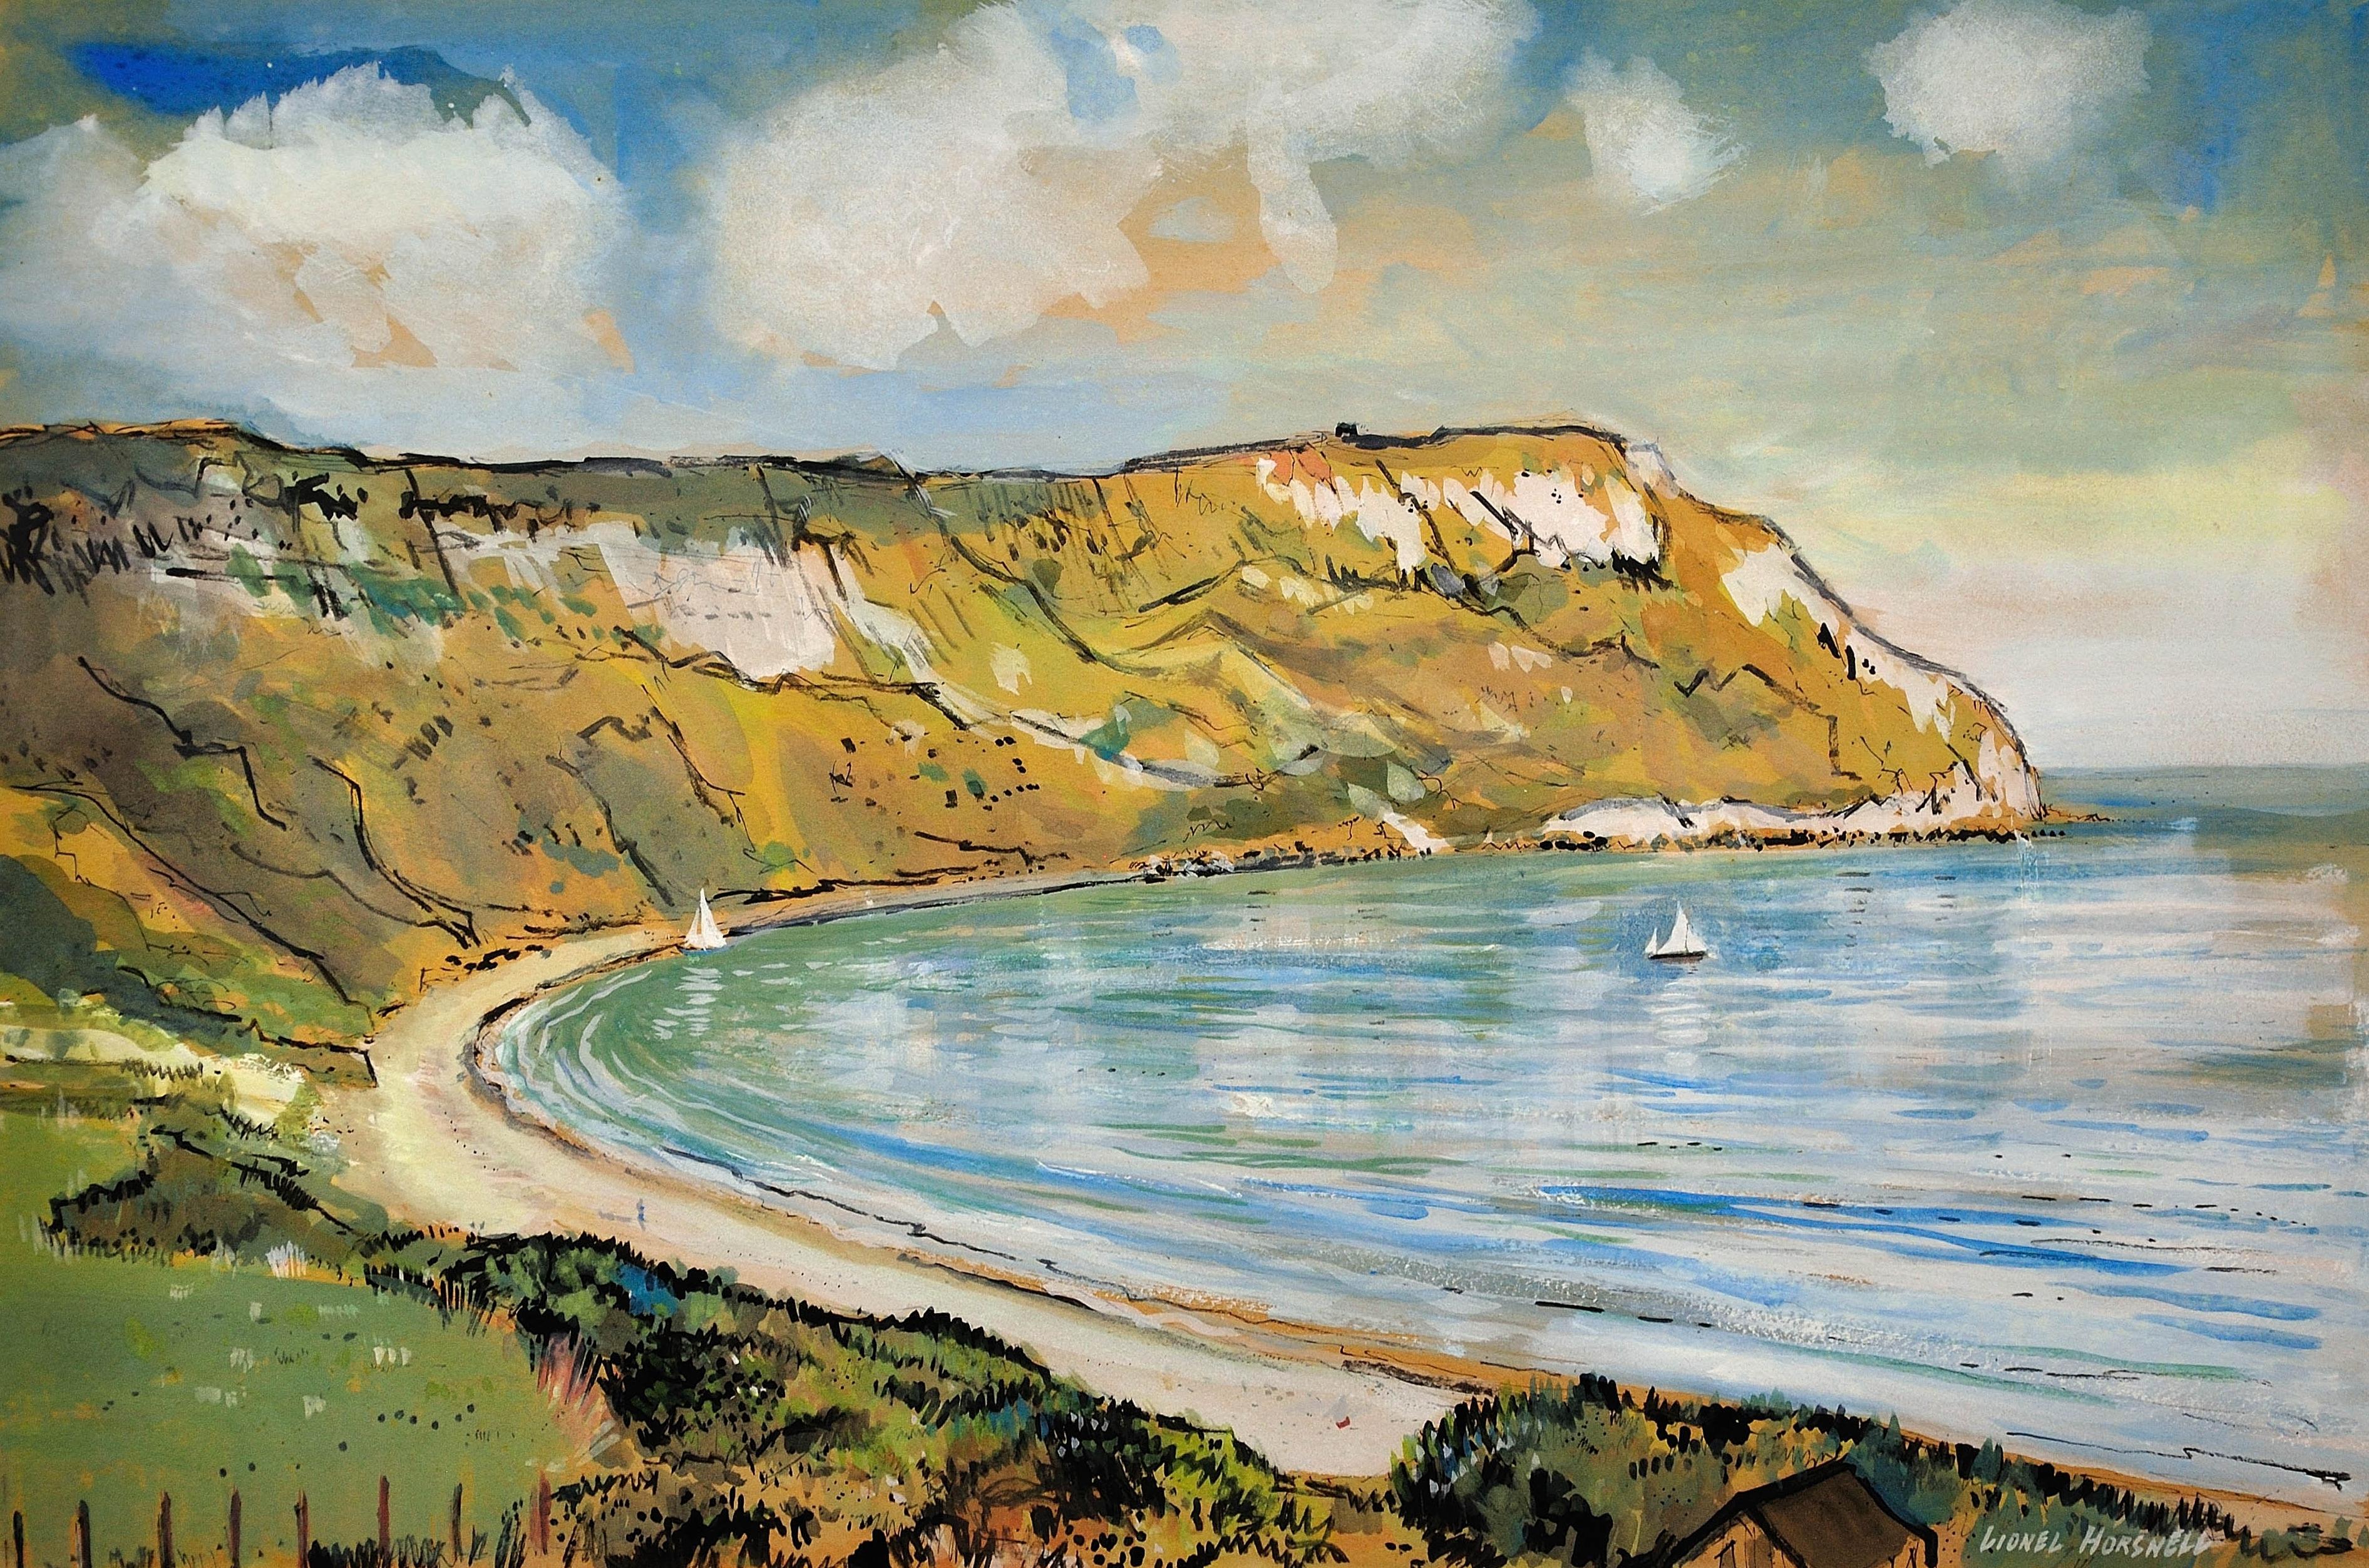 Ringstead Bay and White Nothe. Dorset. Weymouth and Portland. Jurassic Coast. - Art by Lionel Horsnell